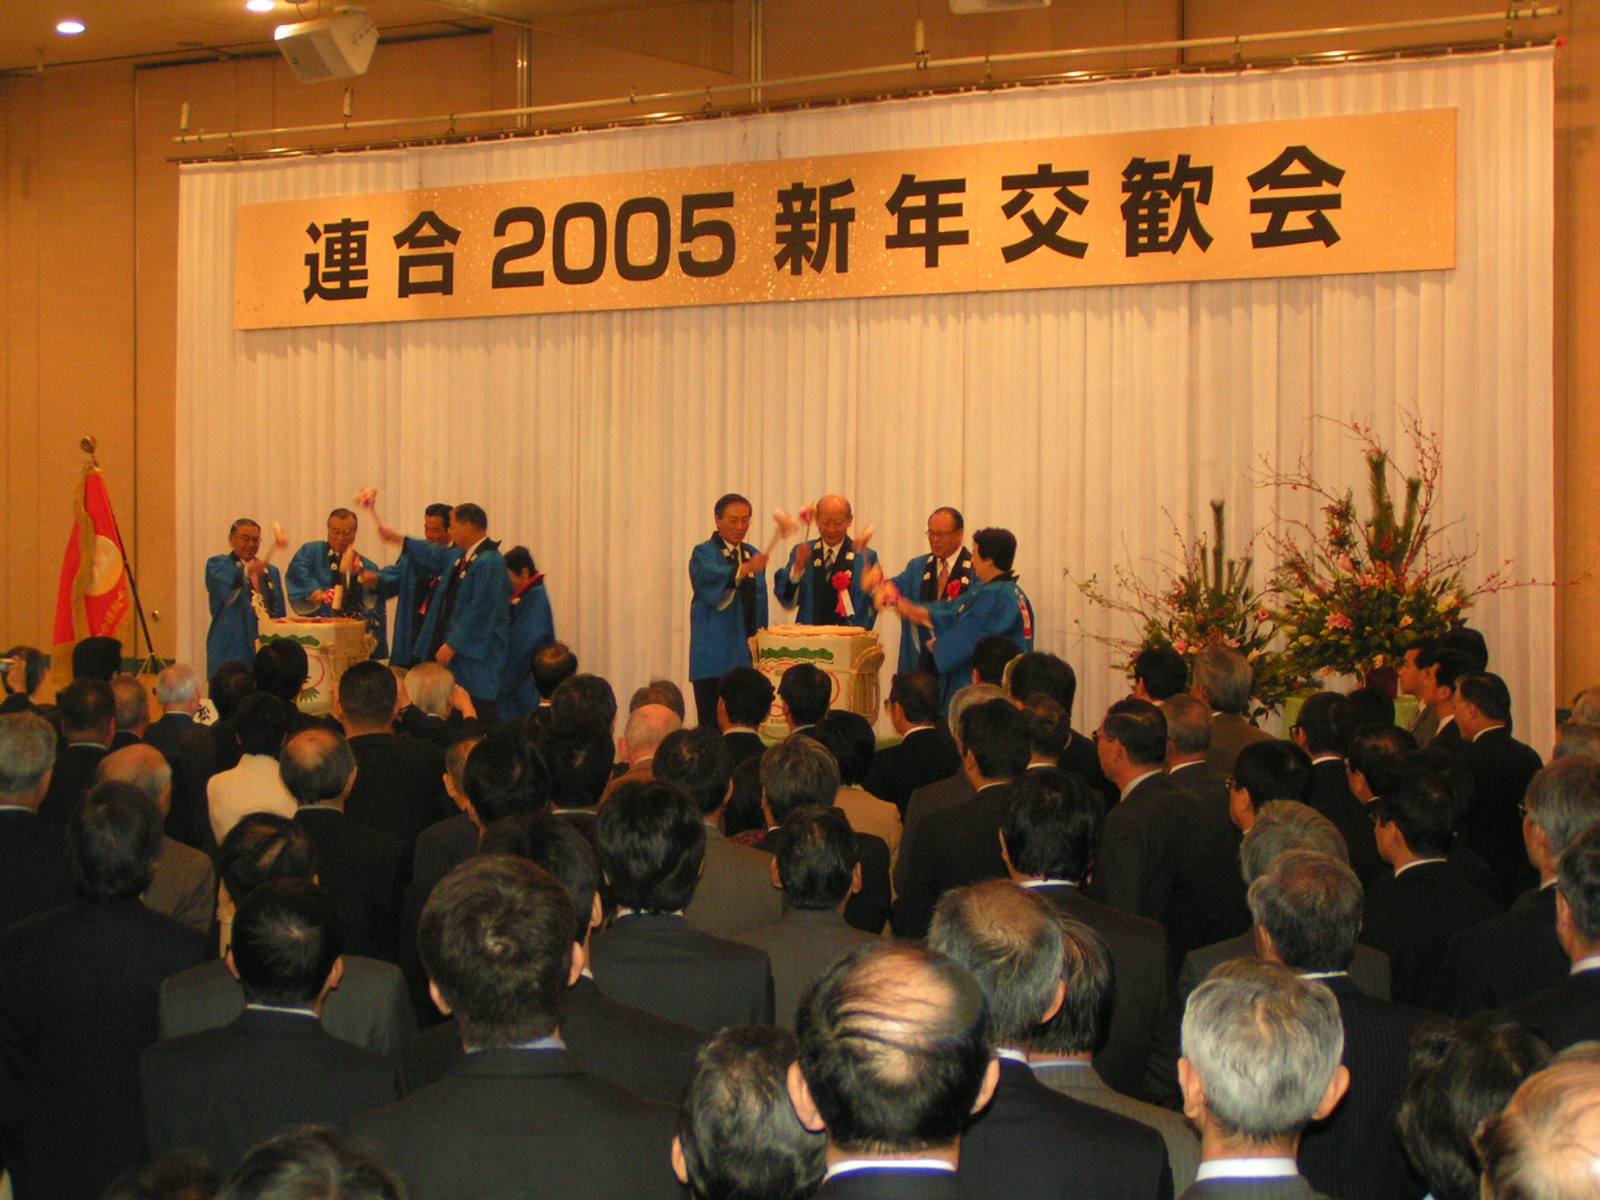 Photo: RENGO officials, political and business leaders performing the Kagamiwari ceremony (the breaking of a traditional sake barrel). (January 5, Tokyo)